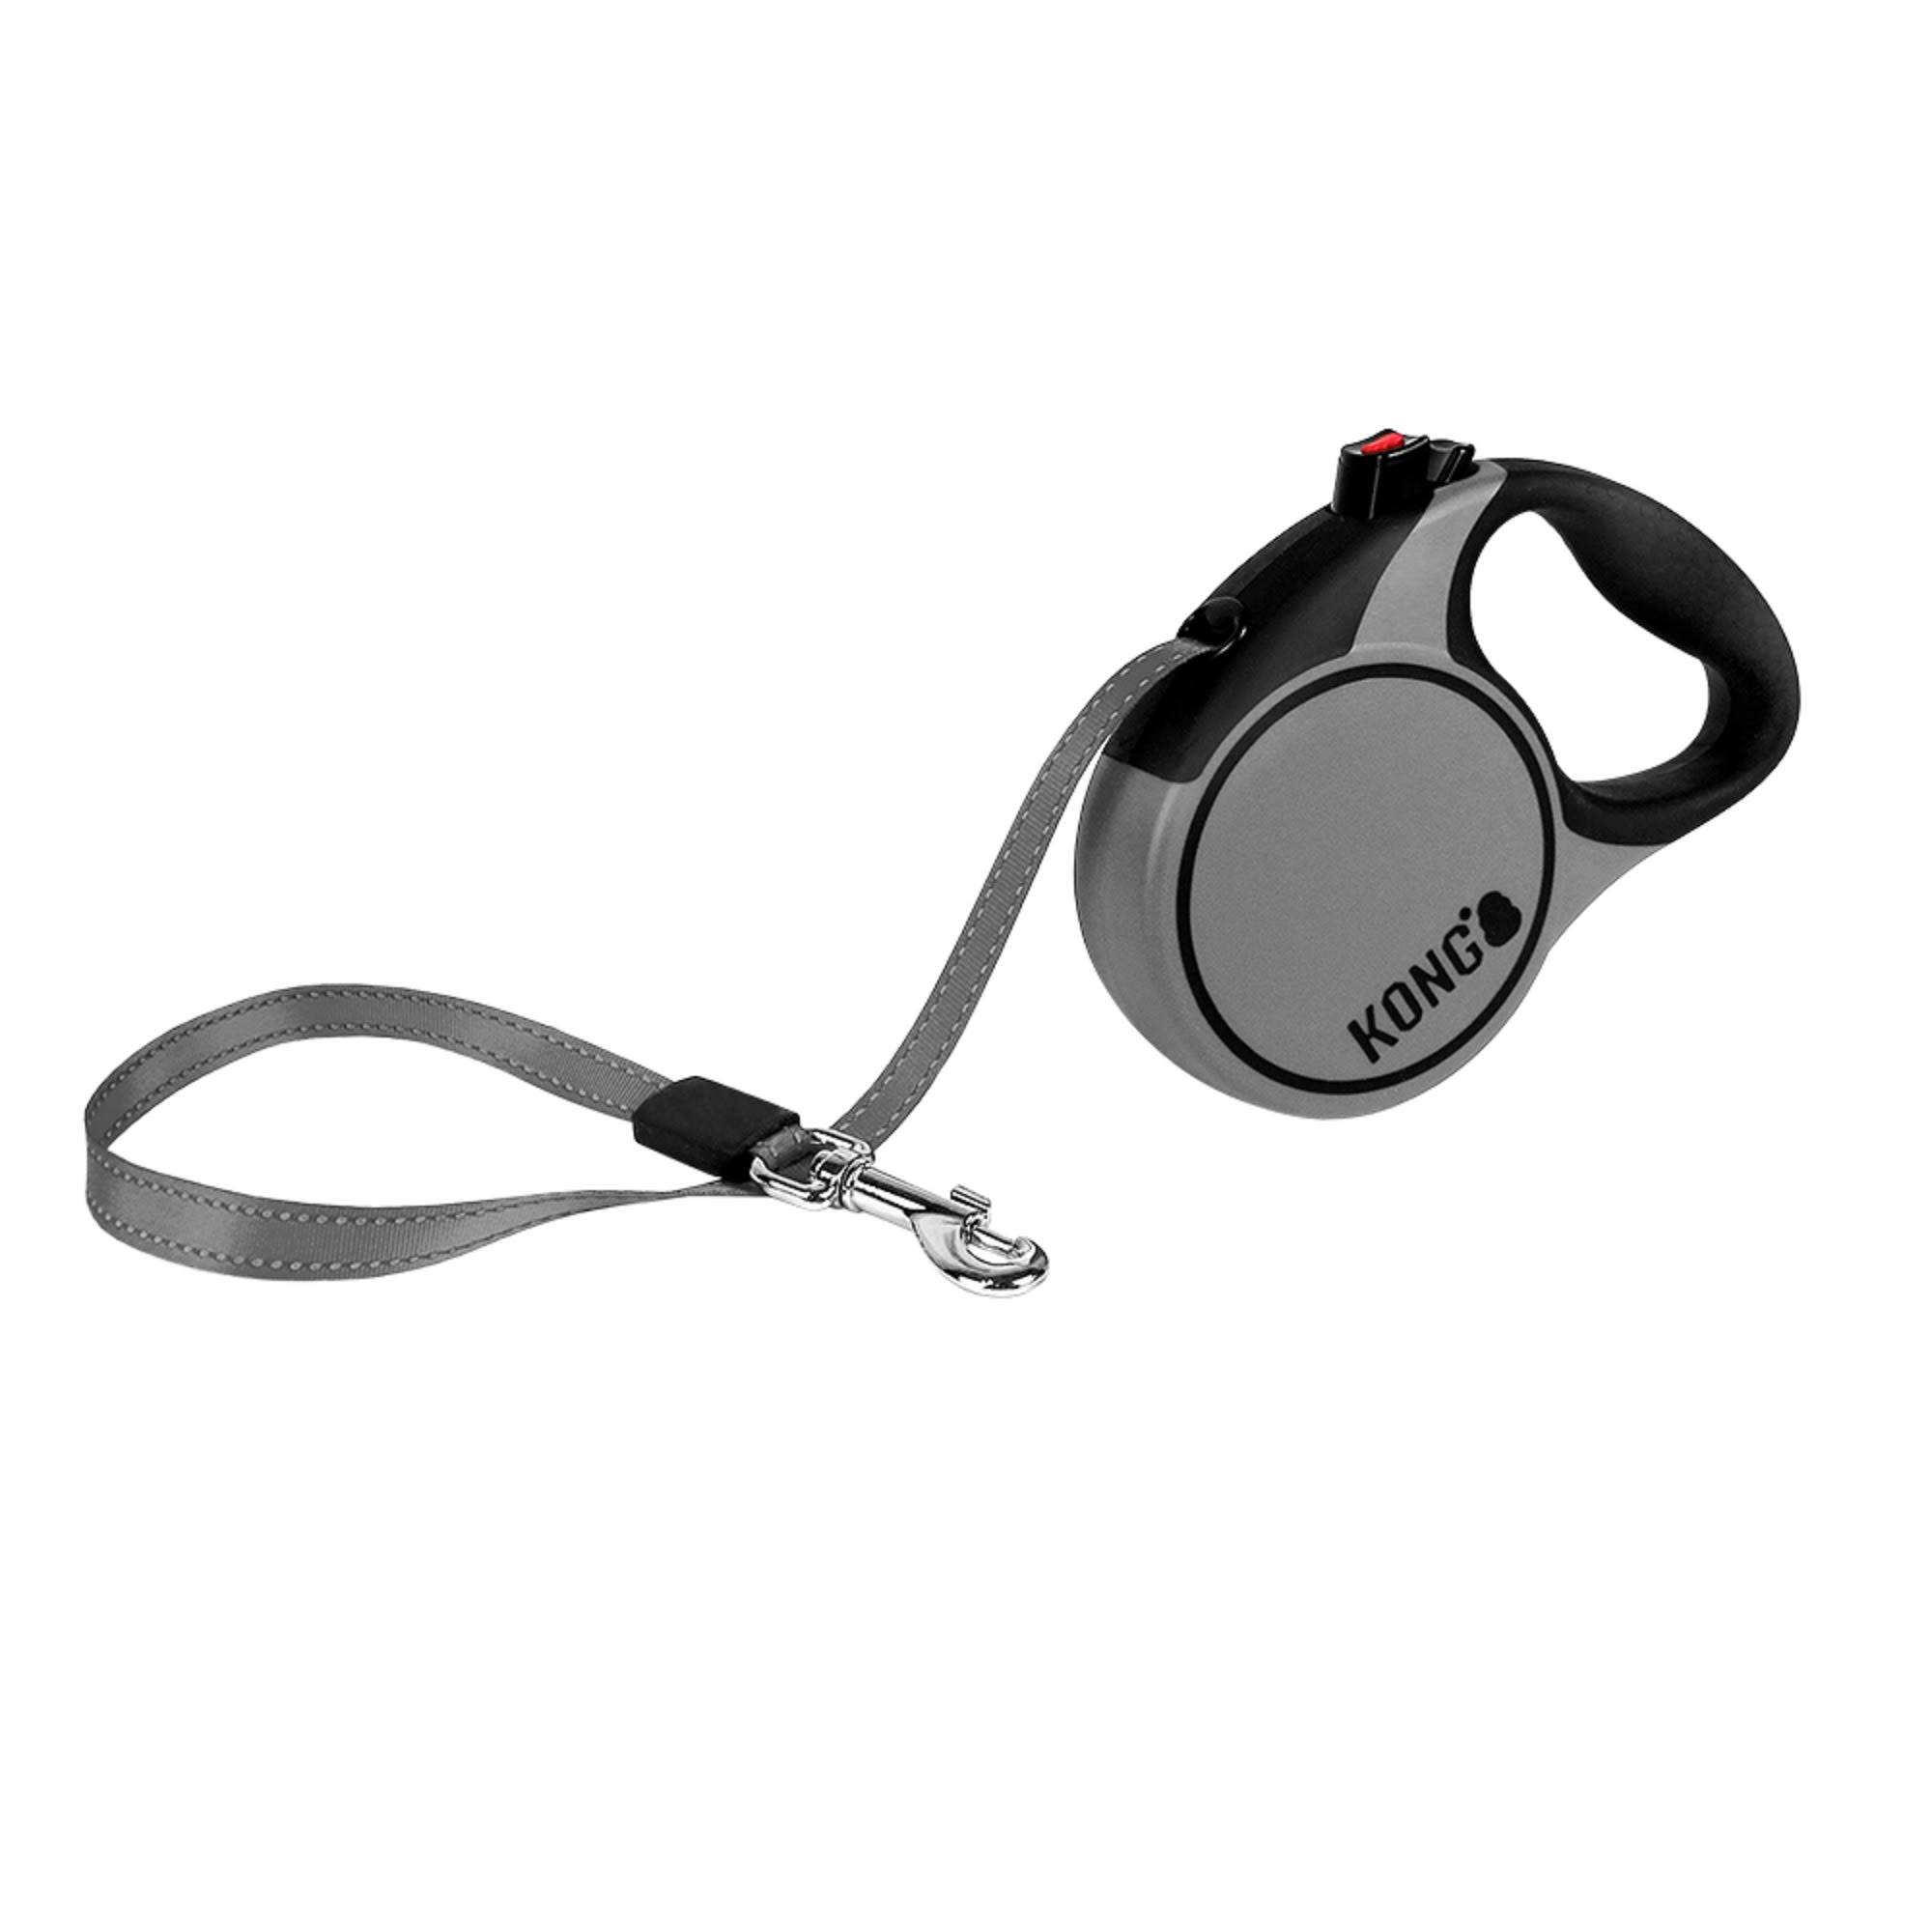 KONG Gray Terrain Retractable Dog Leash for Dogs Up To 25 lbs., 10 ft.